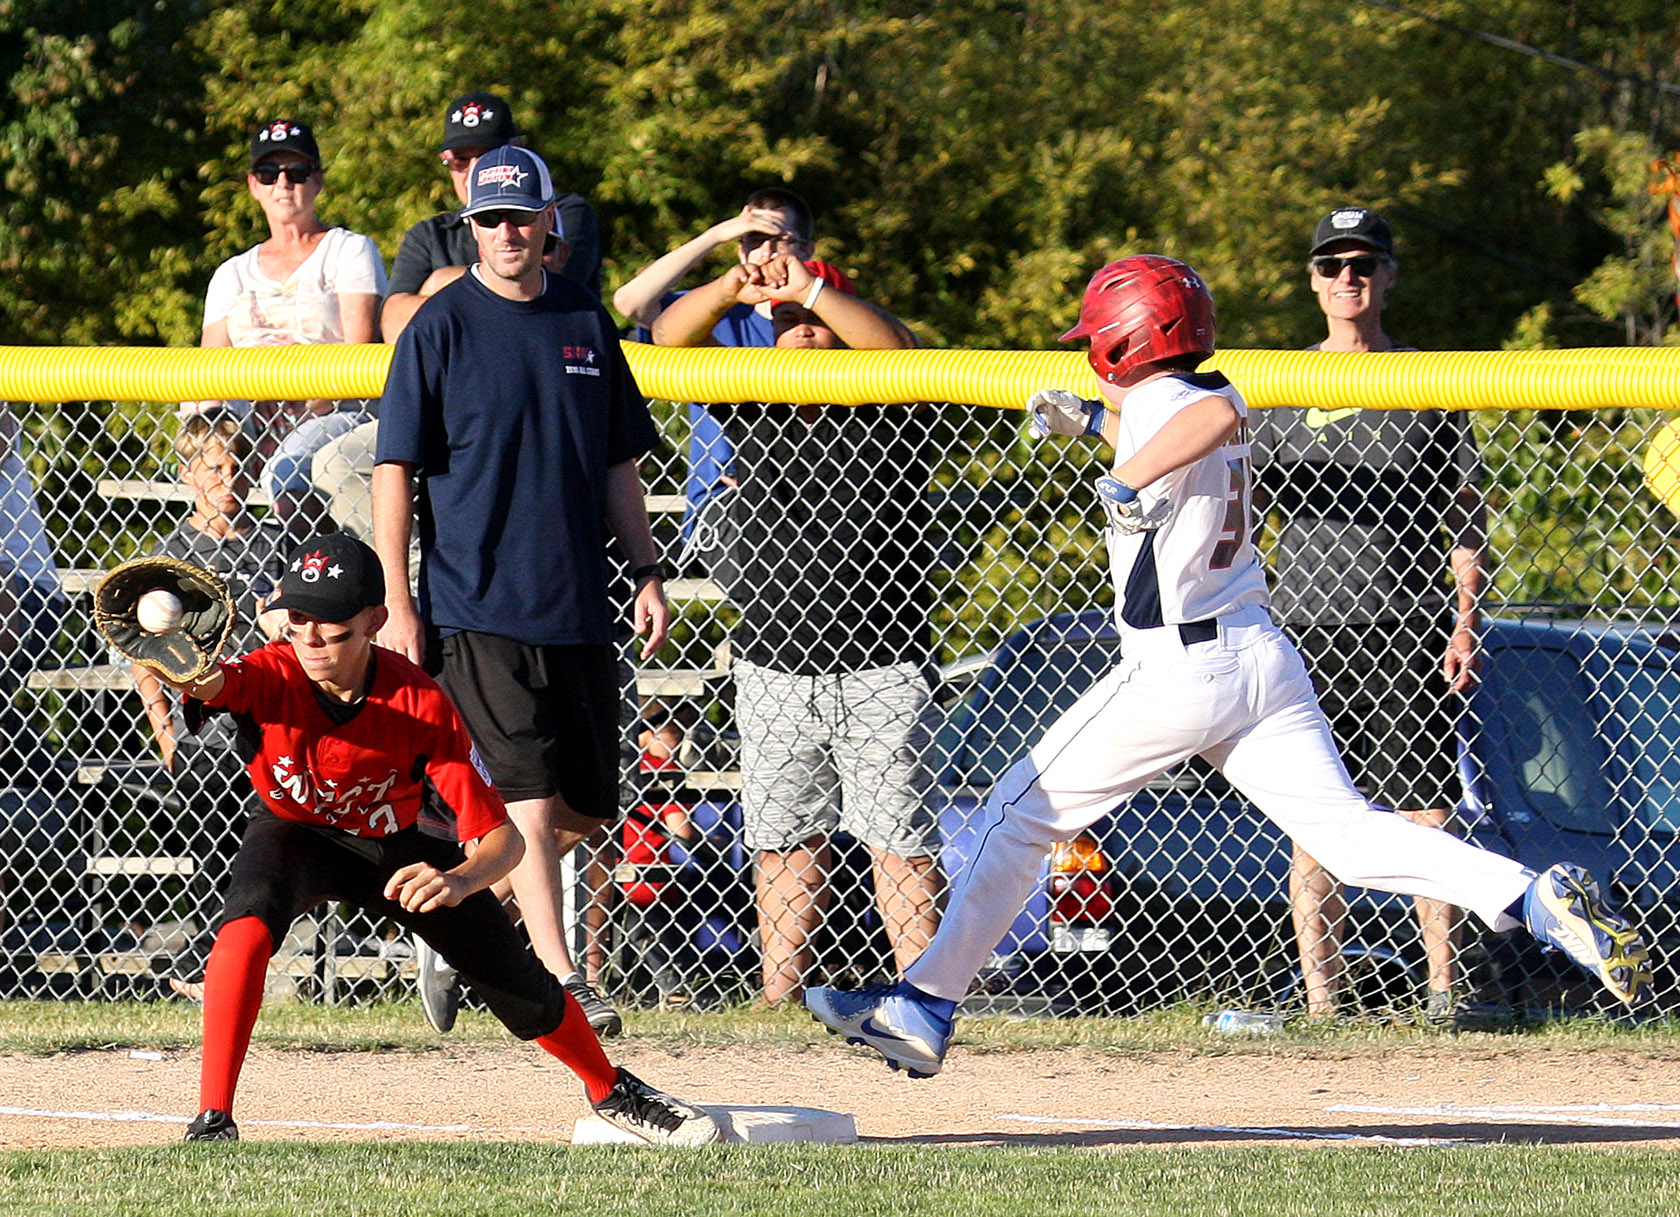 First baseman Miles Gosztola of West Seattle catches the ball as South Highline Nationals Avery Procter is only inches short of the bag.